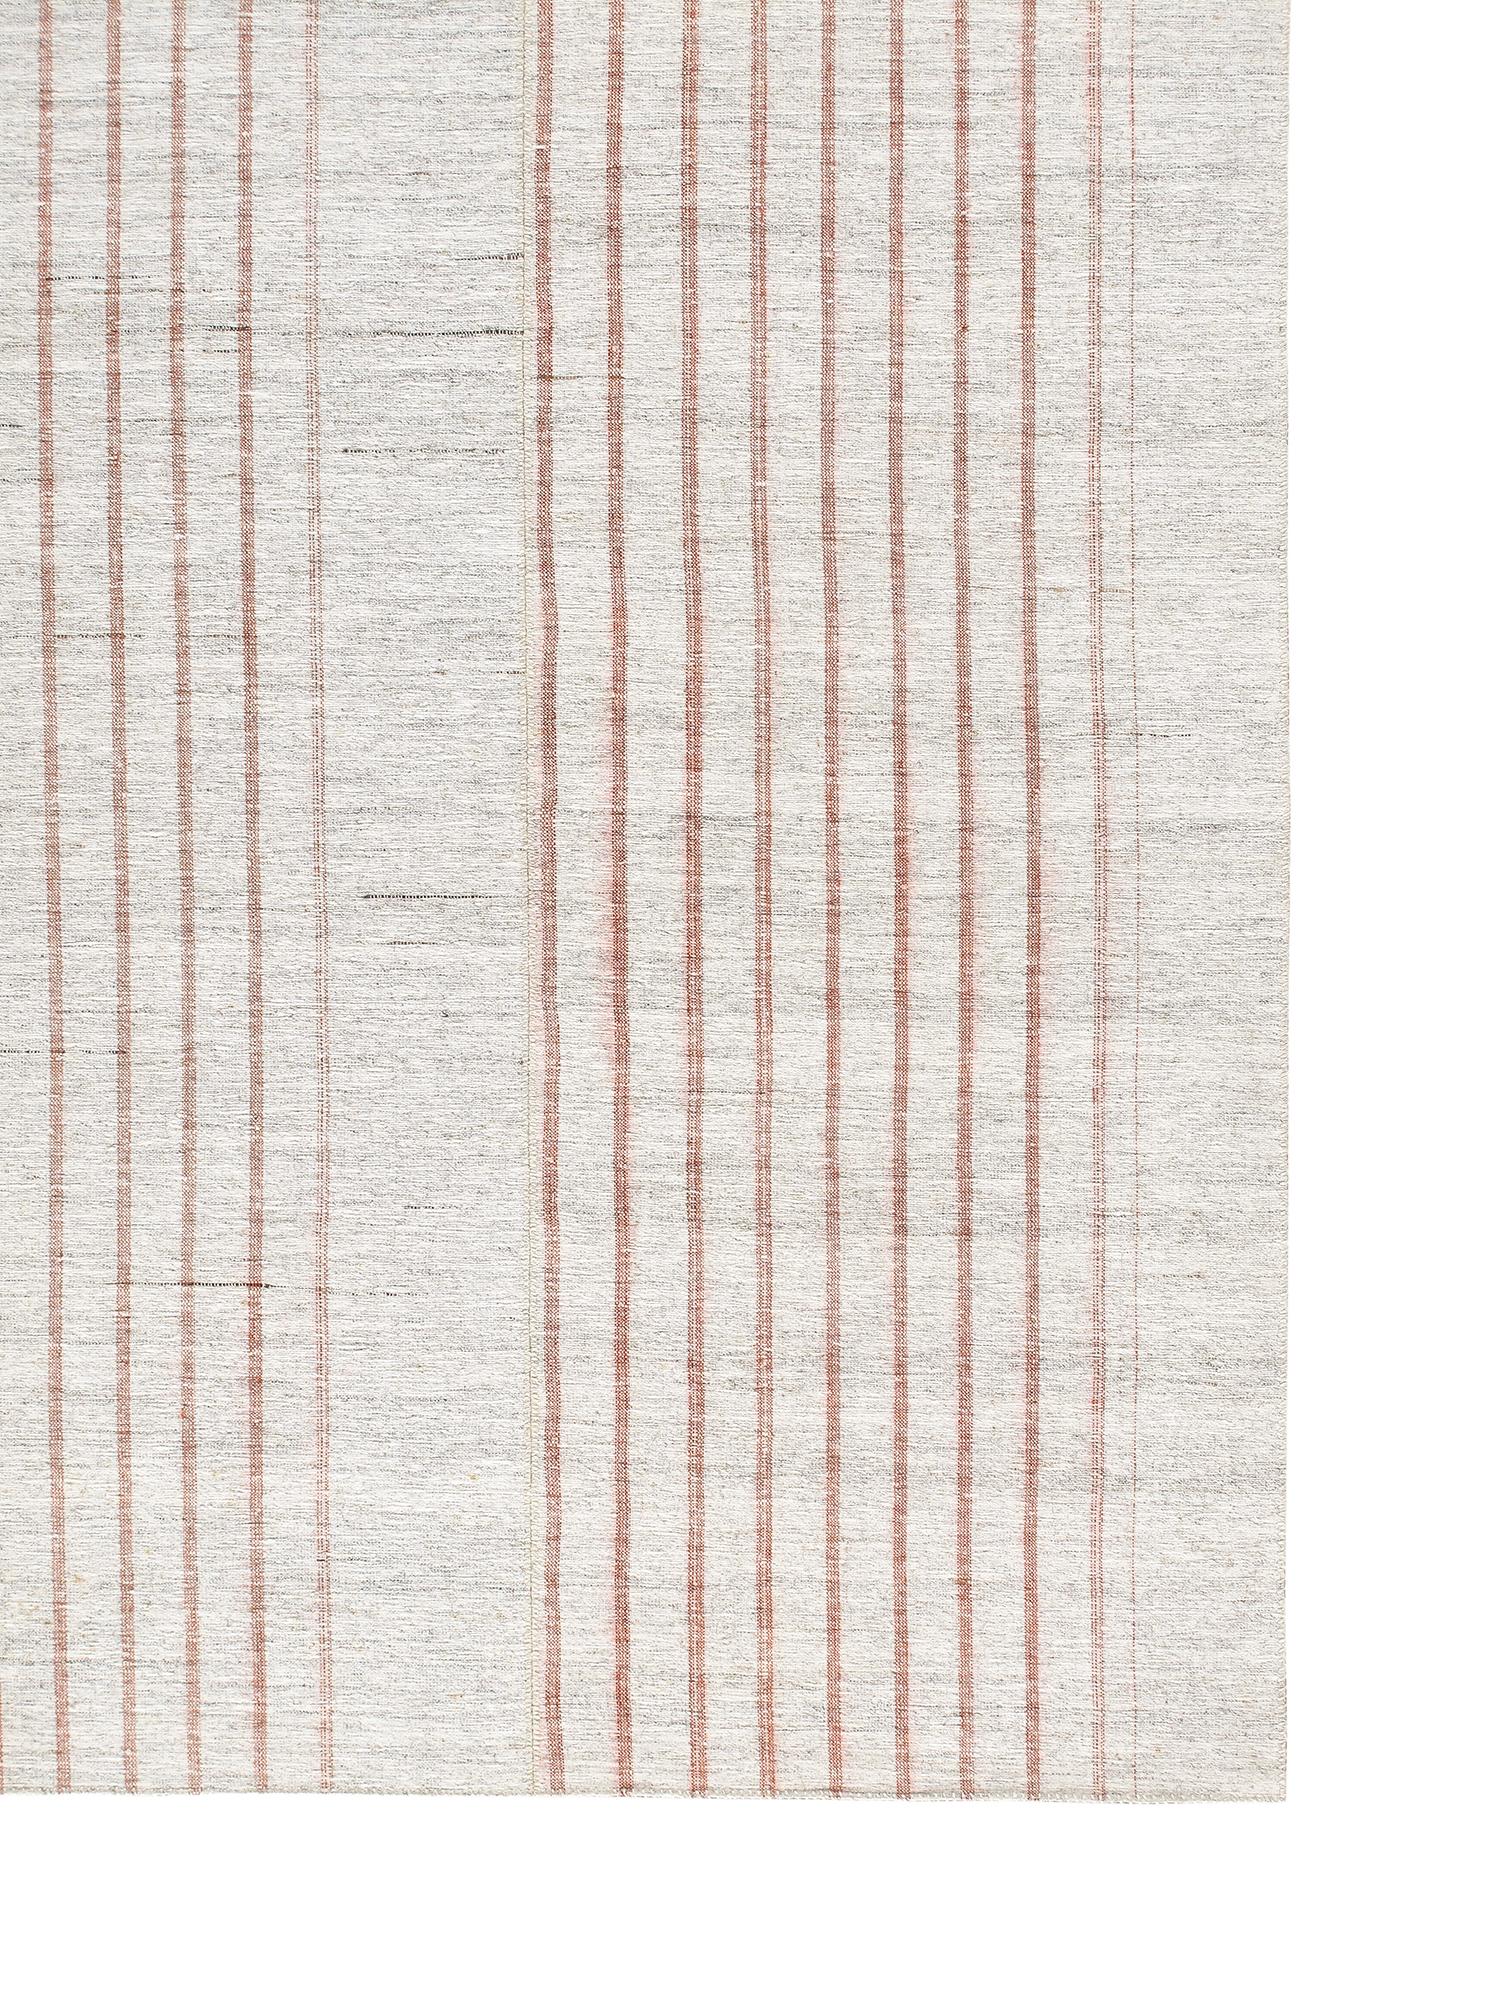 Persian Vintage Striped Neutral Toned Pelas Rug  For Sale